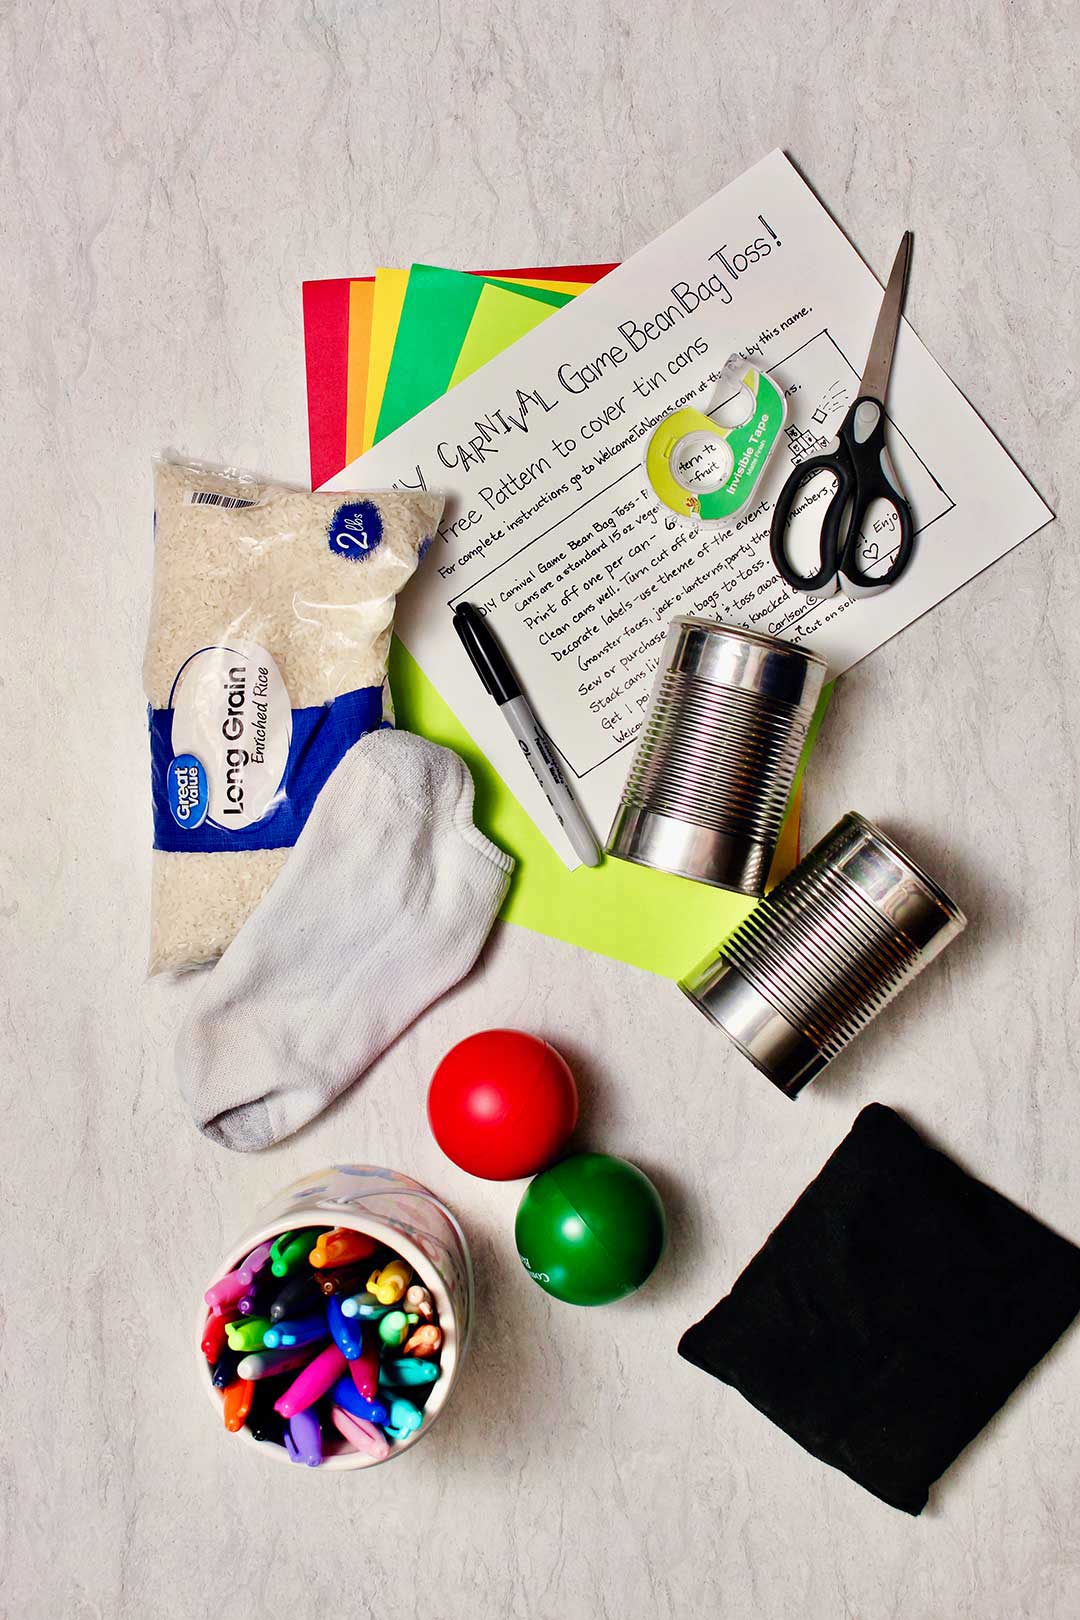 Supplies you would need for carnival games. Rice, a sock, tin cans, scissors, markers and paper.